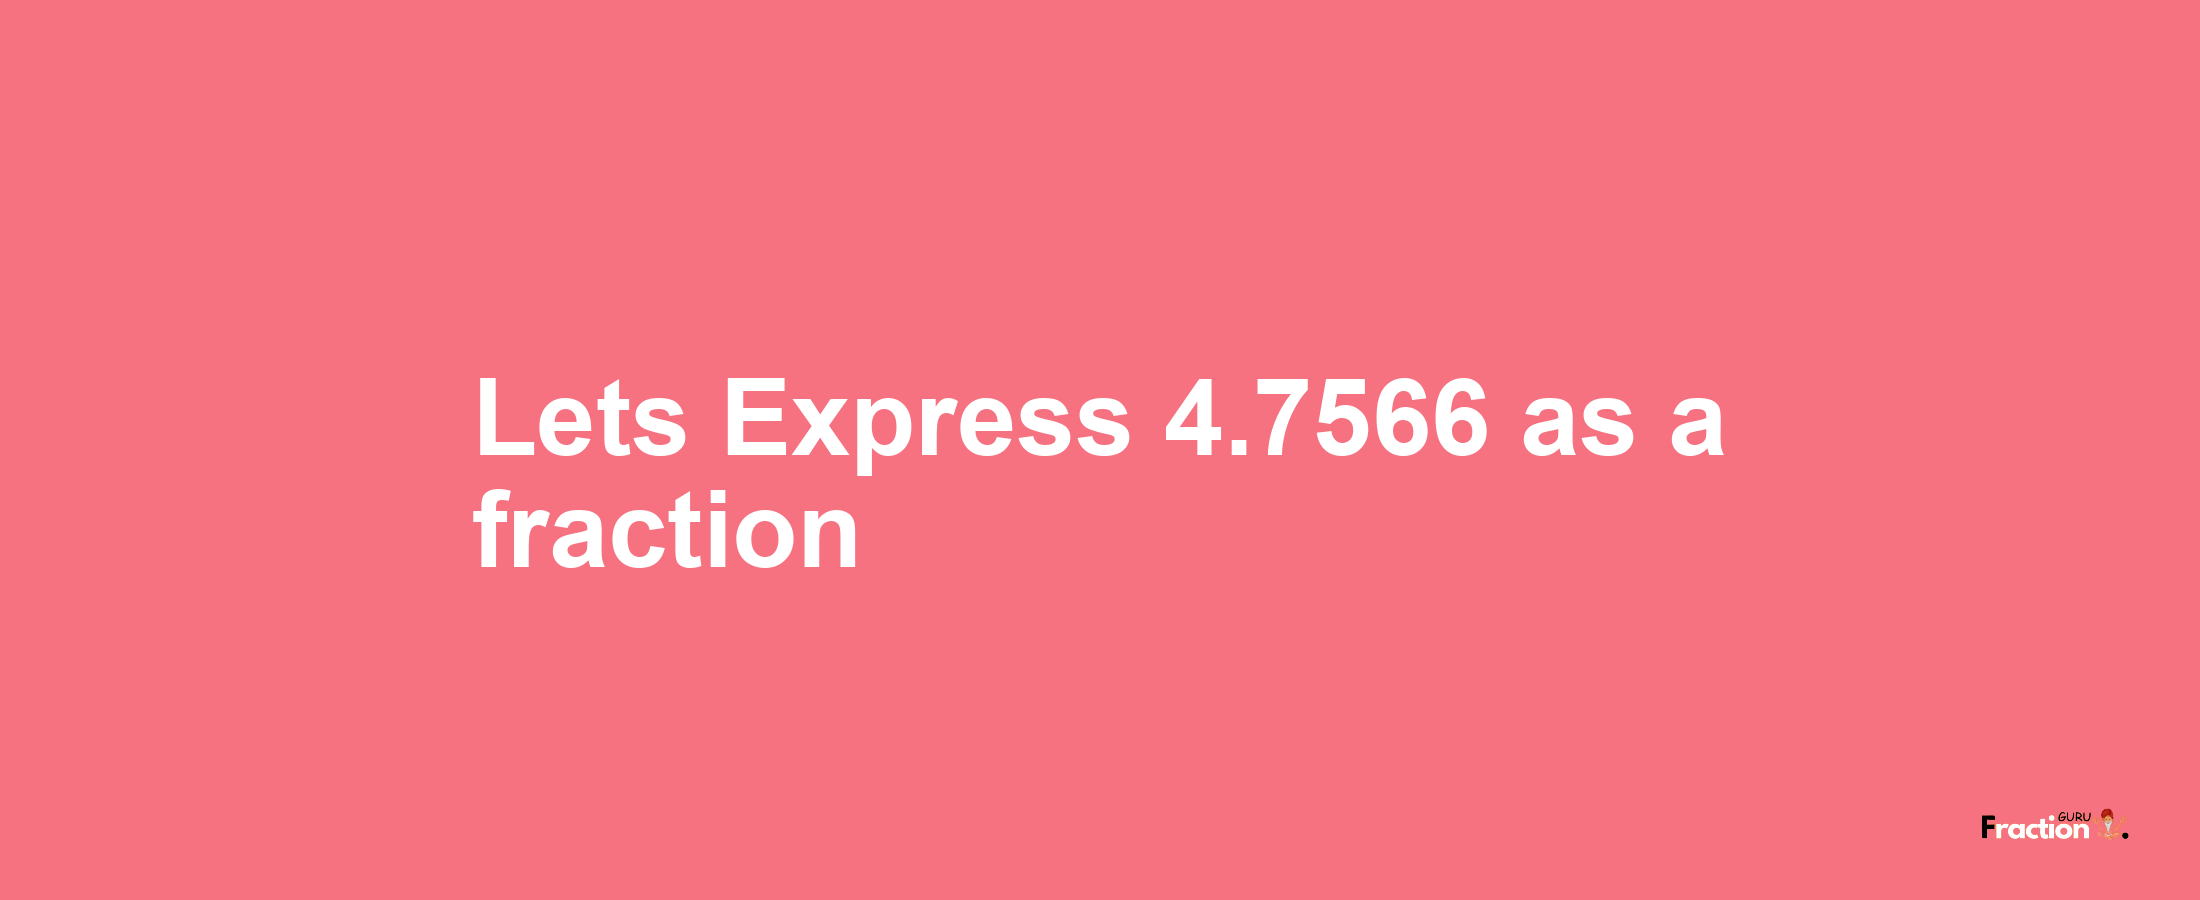 Lets Express 4.7566 as afraction